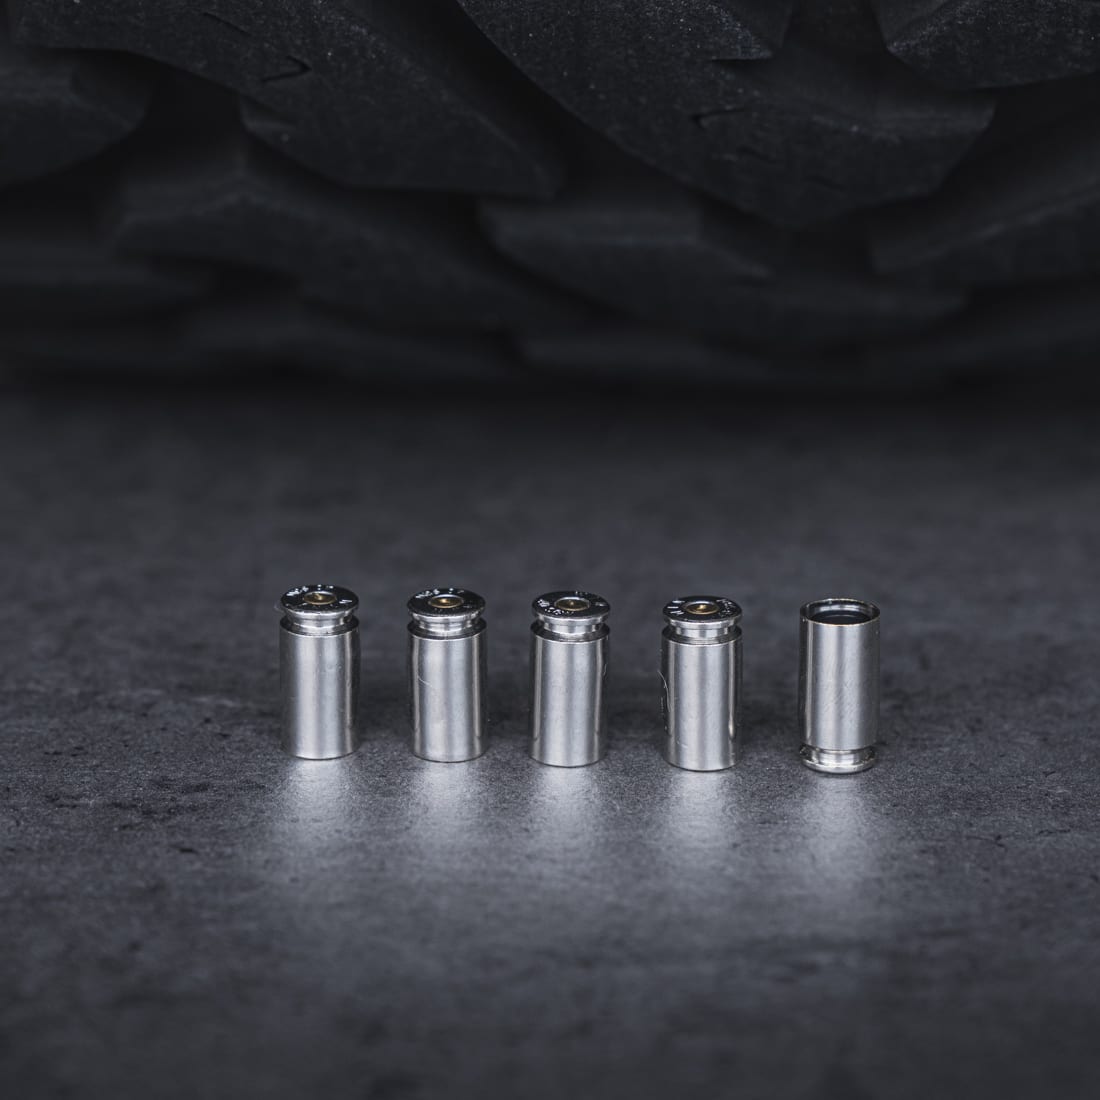 Tire Valve Stem Covers (Set of 5) - Freedom Seeds